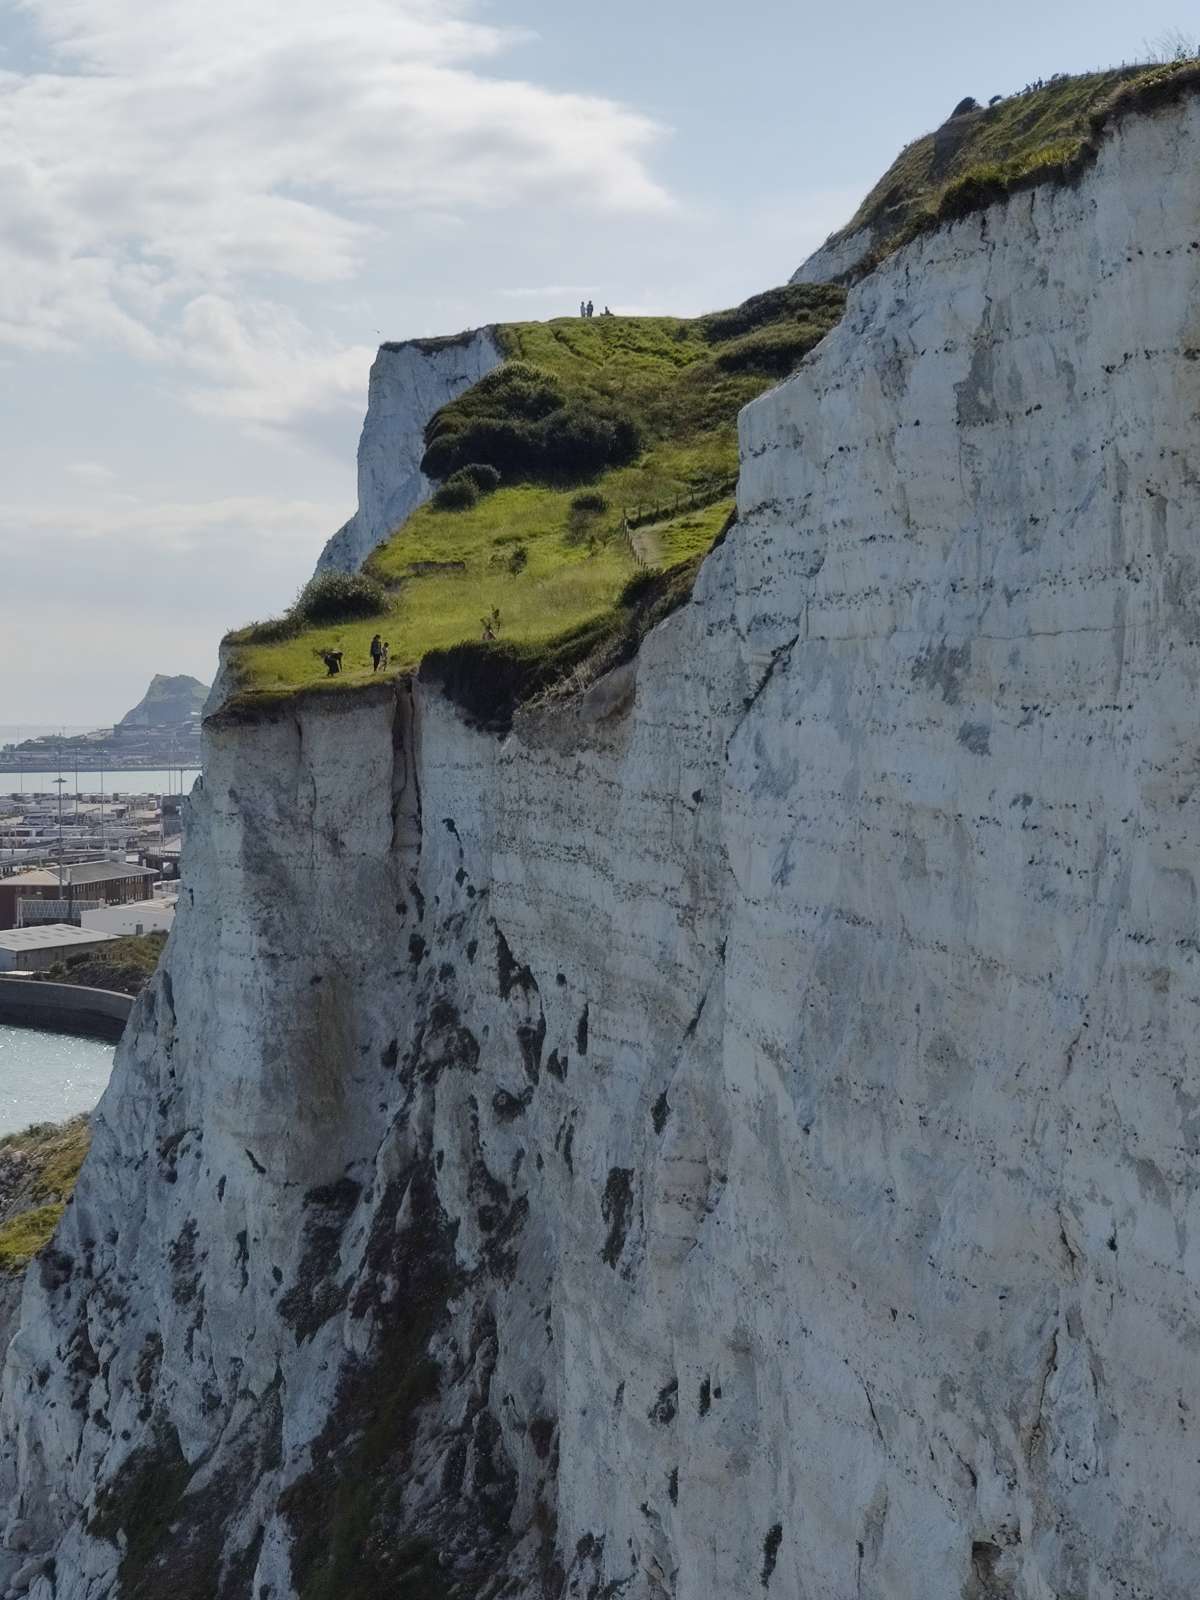 This cliffs are absolutely massive